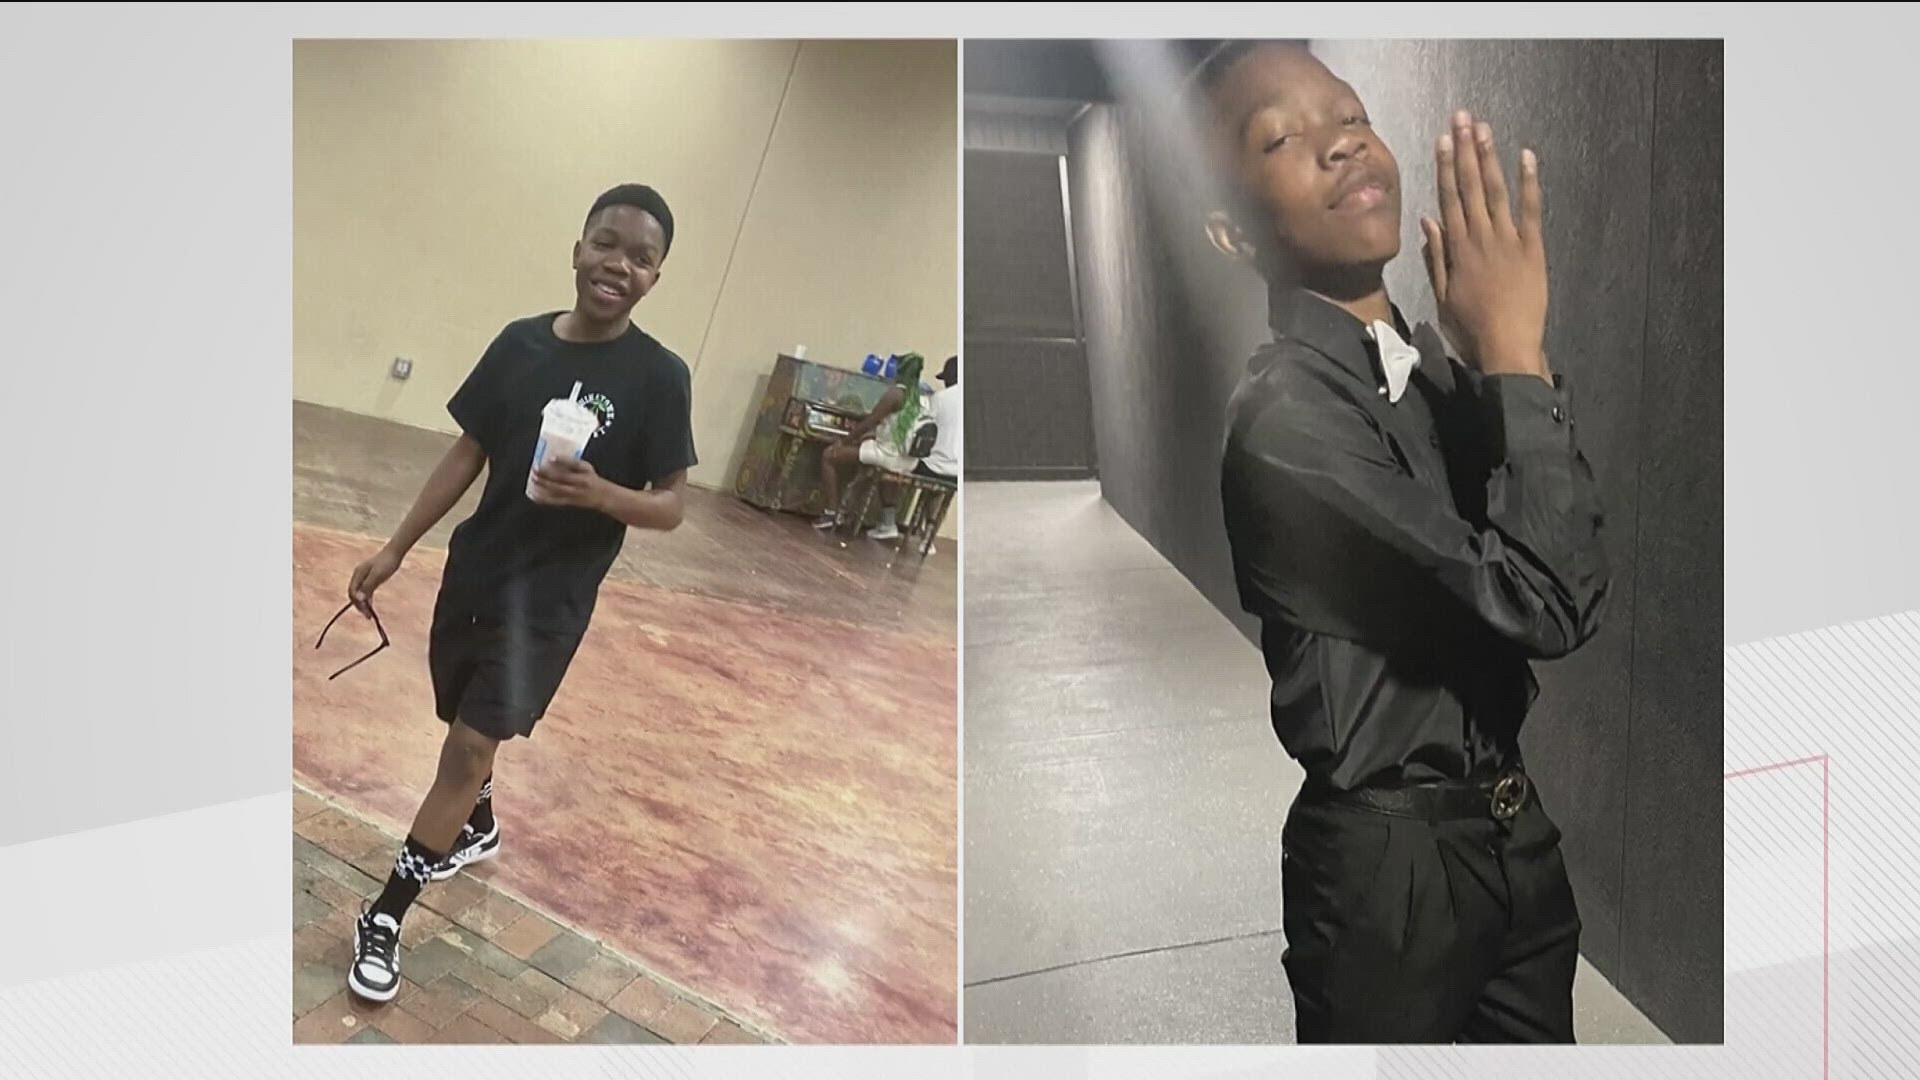 Police say 15-year-old Mario Bailey was shot and killed on Feb. 9 after a high school basketball game in East Point.